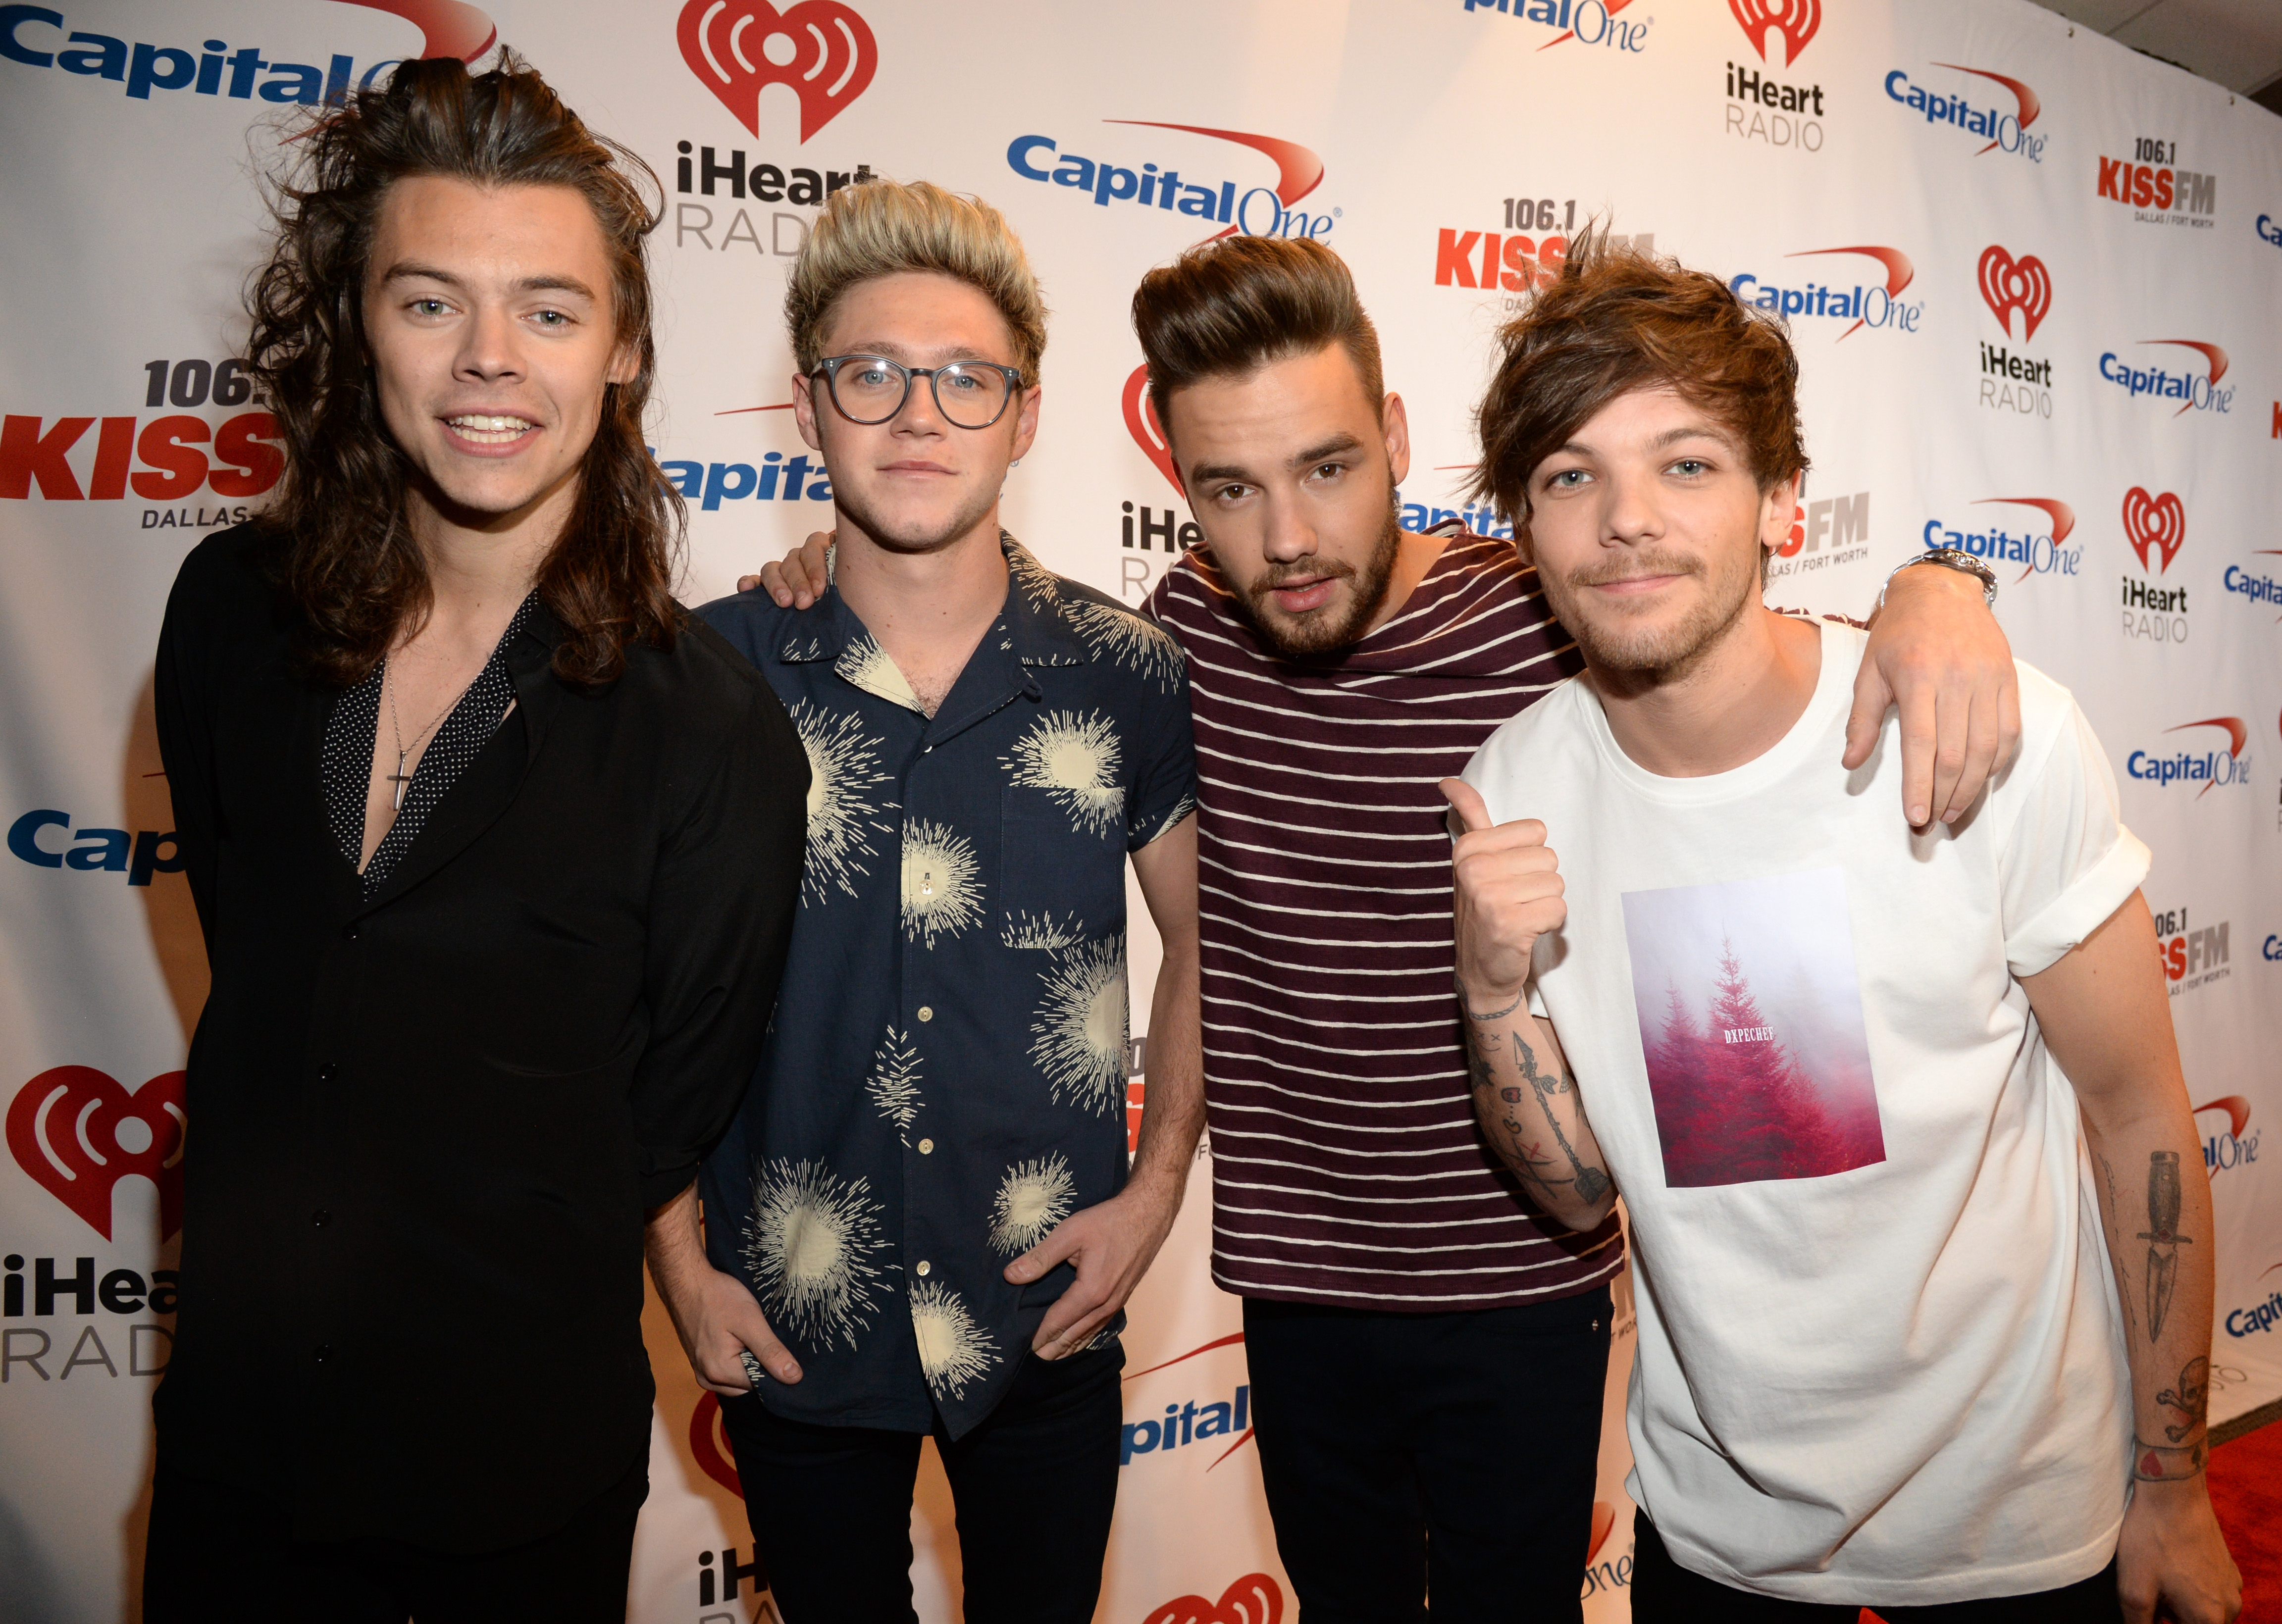 One Direction Will Reunite Soon, According to the Guys Themselves